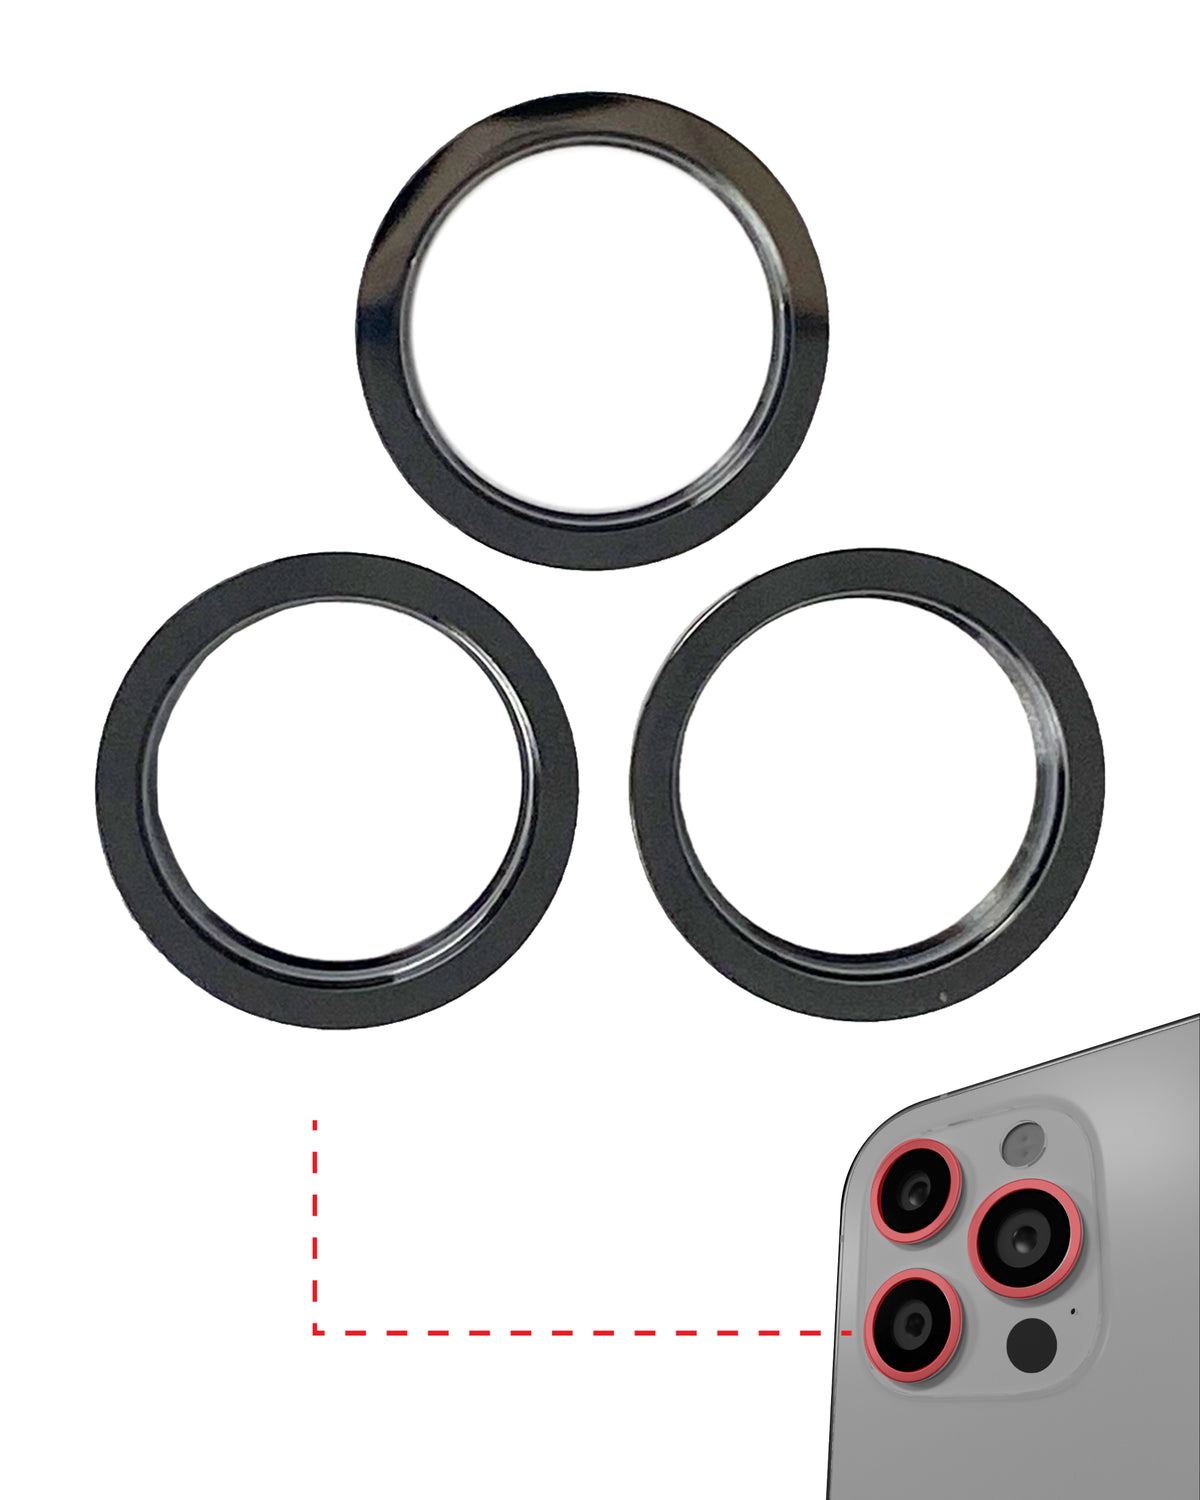 BLACK - BACK CAMERA BEZEL RING ONLY ONLY (3 PIECE SET) FOR IPHONE 11 PRO / 11 PRO MAX  (10 PACK)